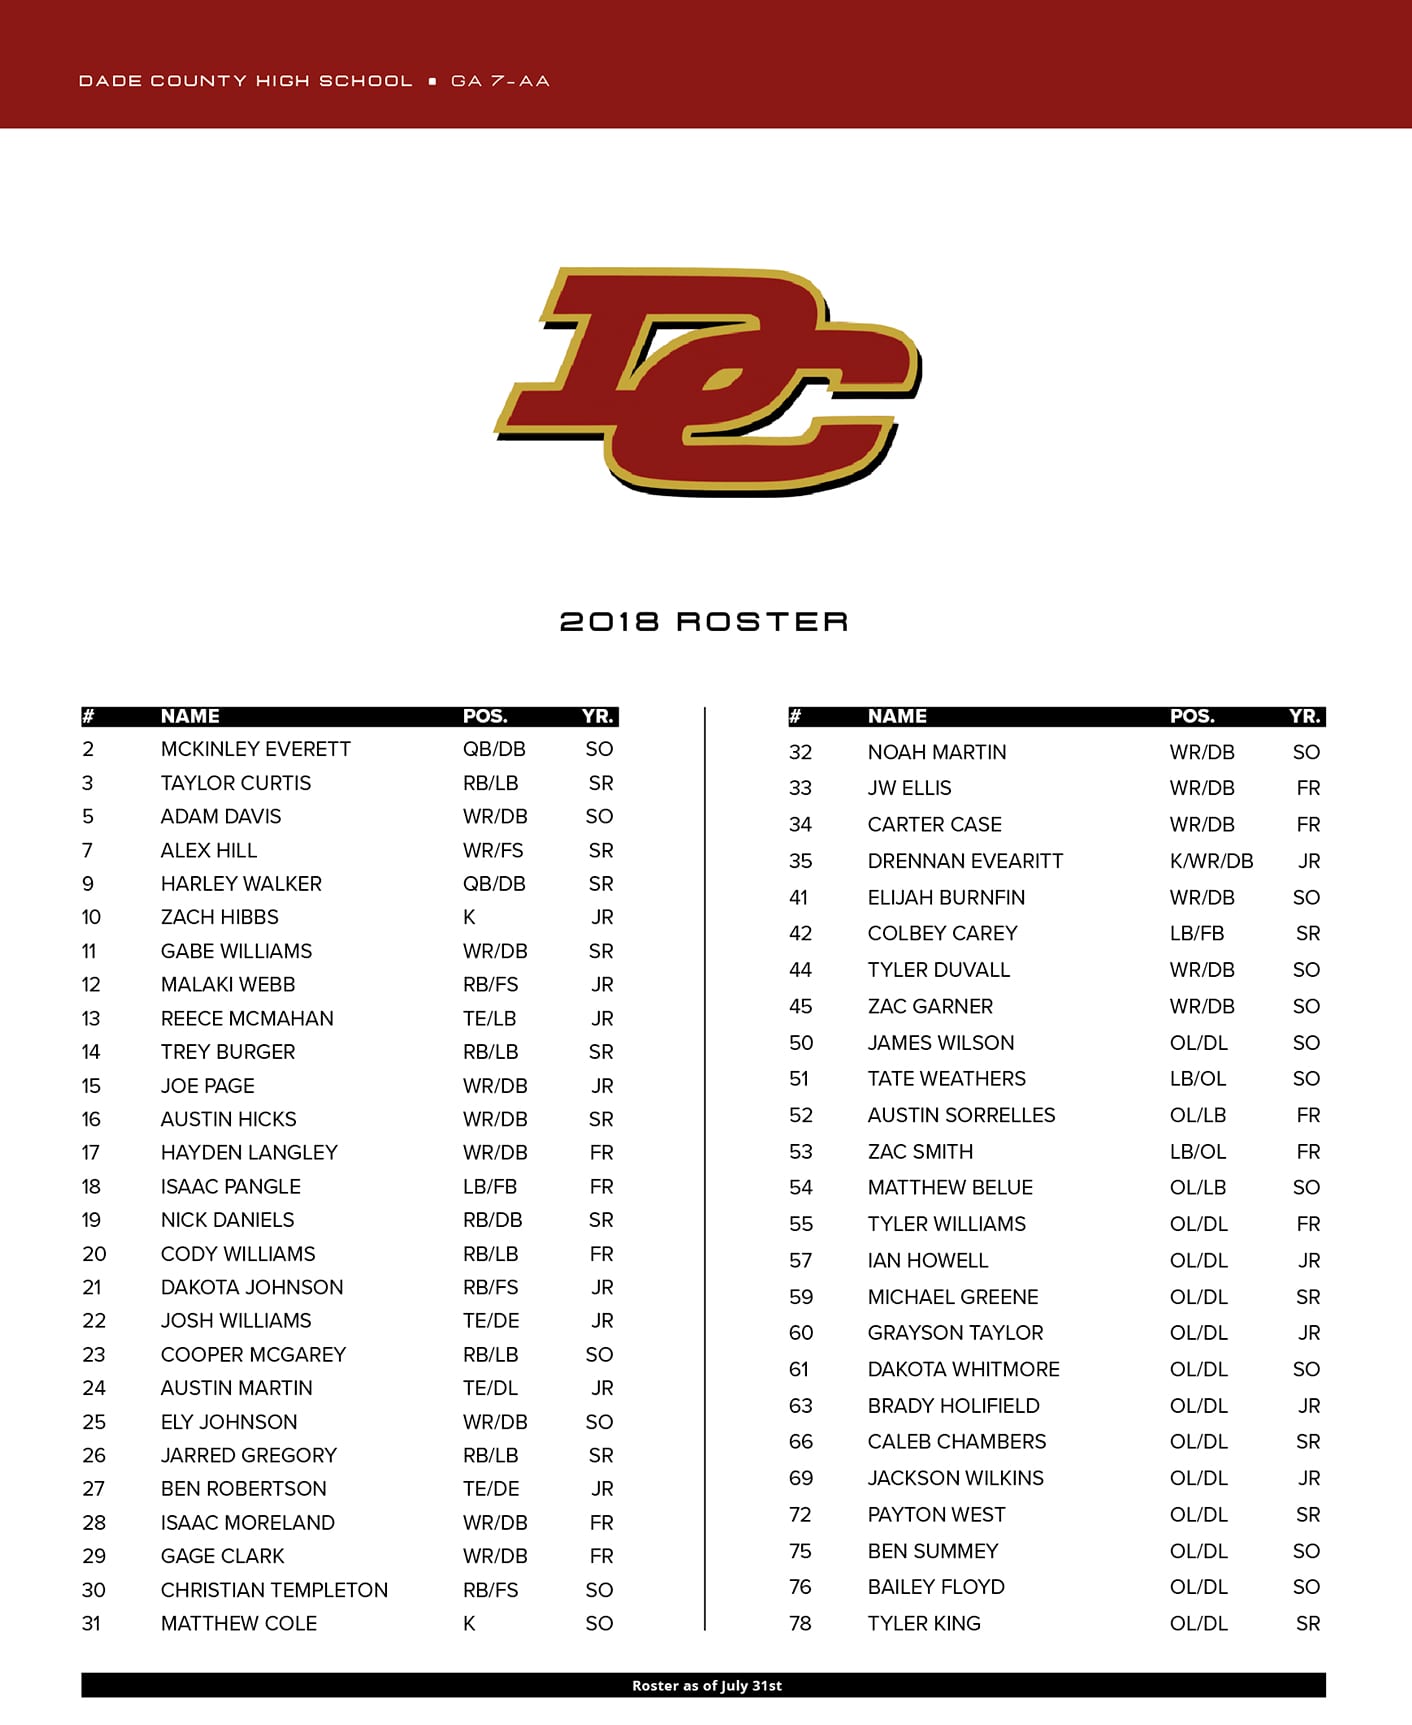  Dade County High School Football 2018 roster in Chattanooga